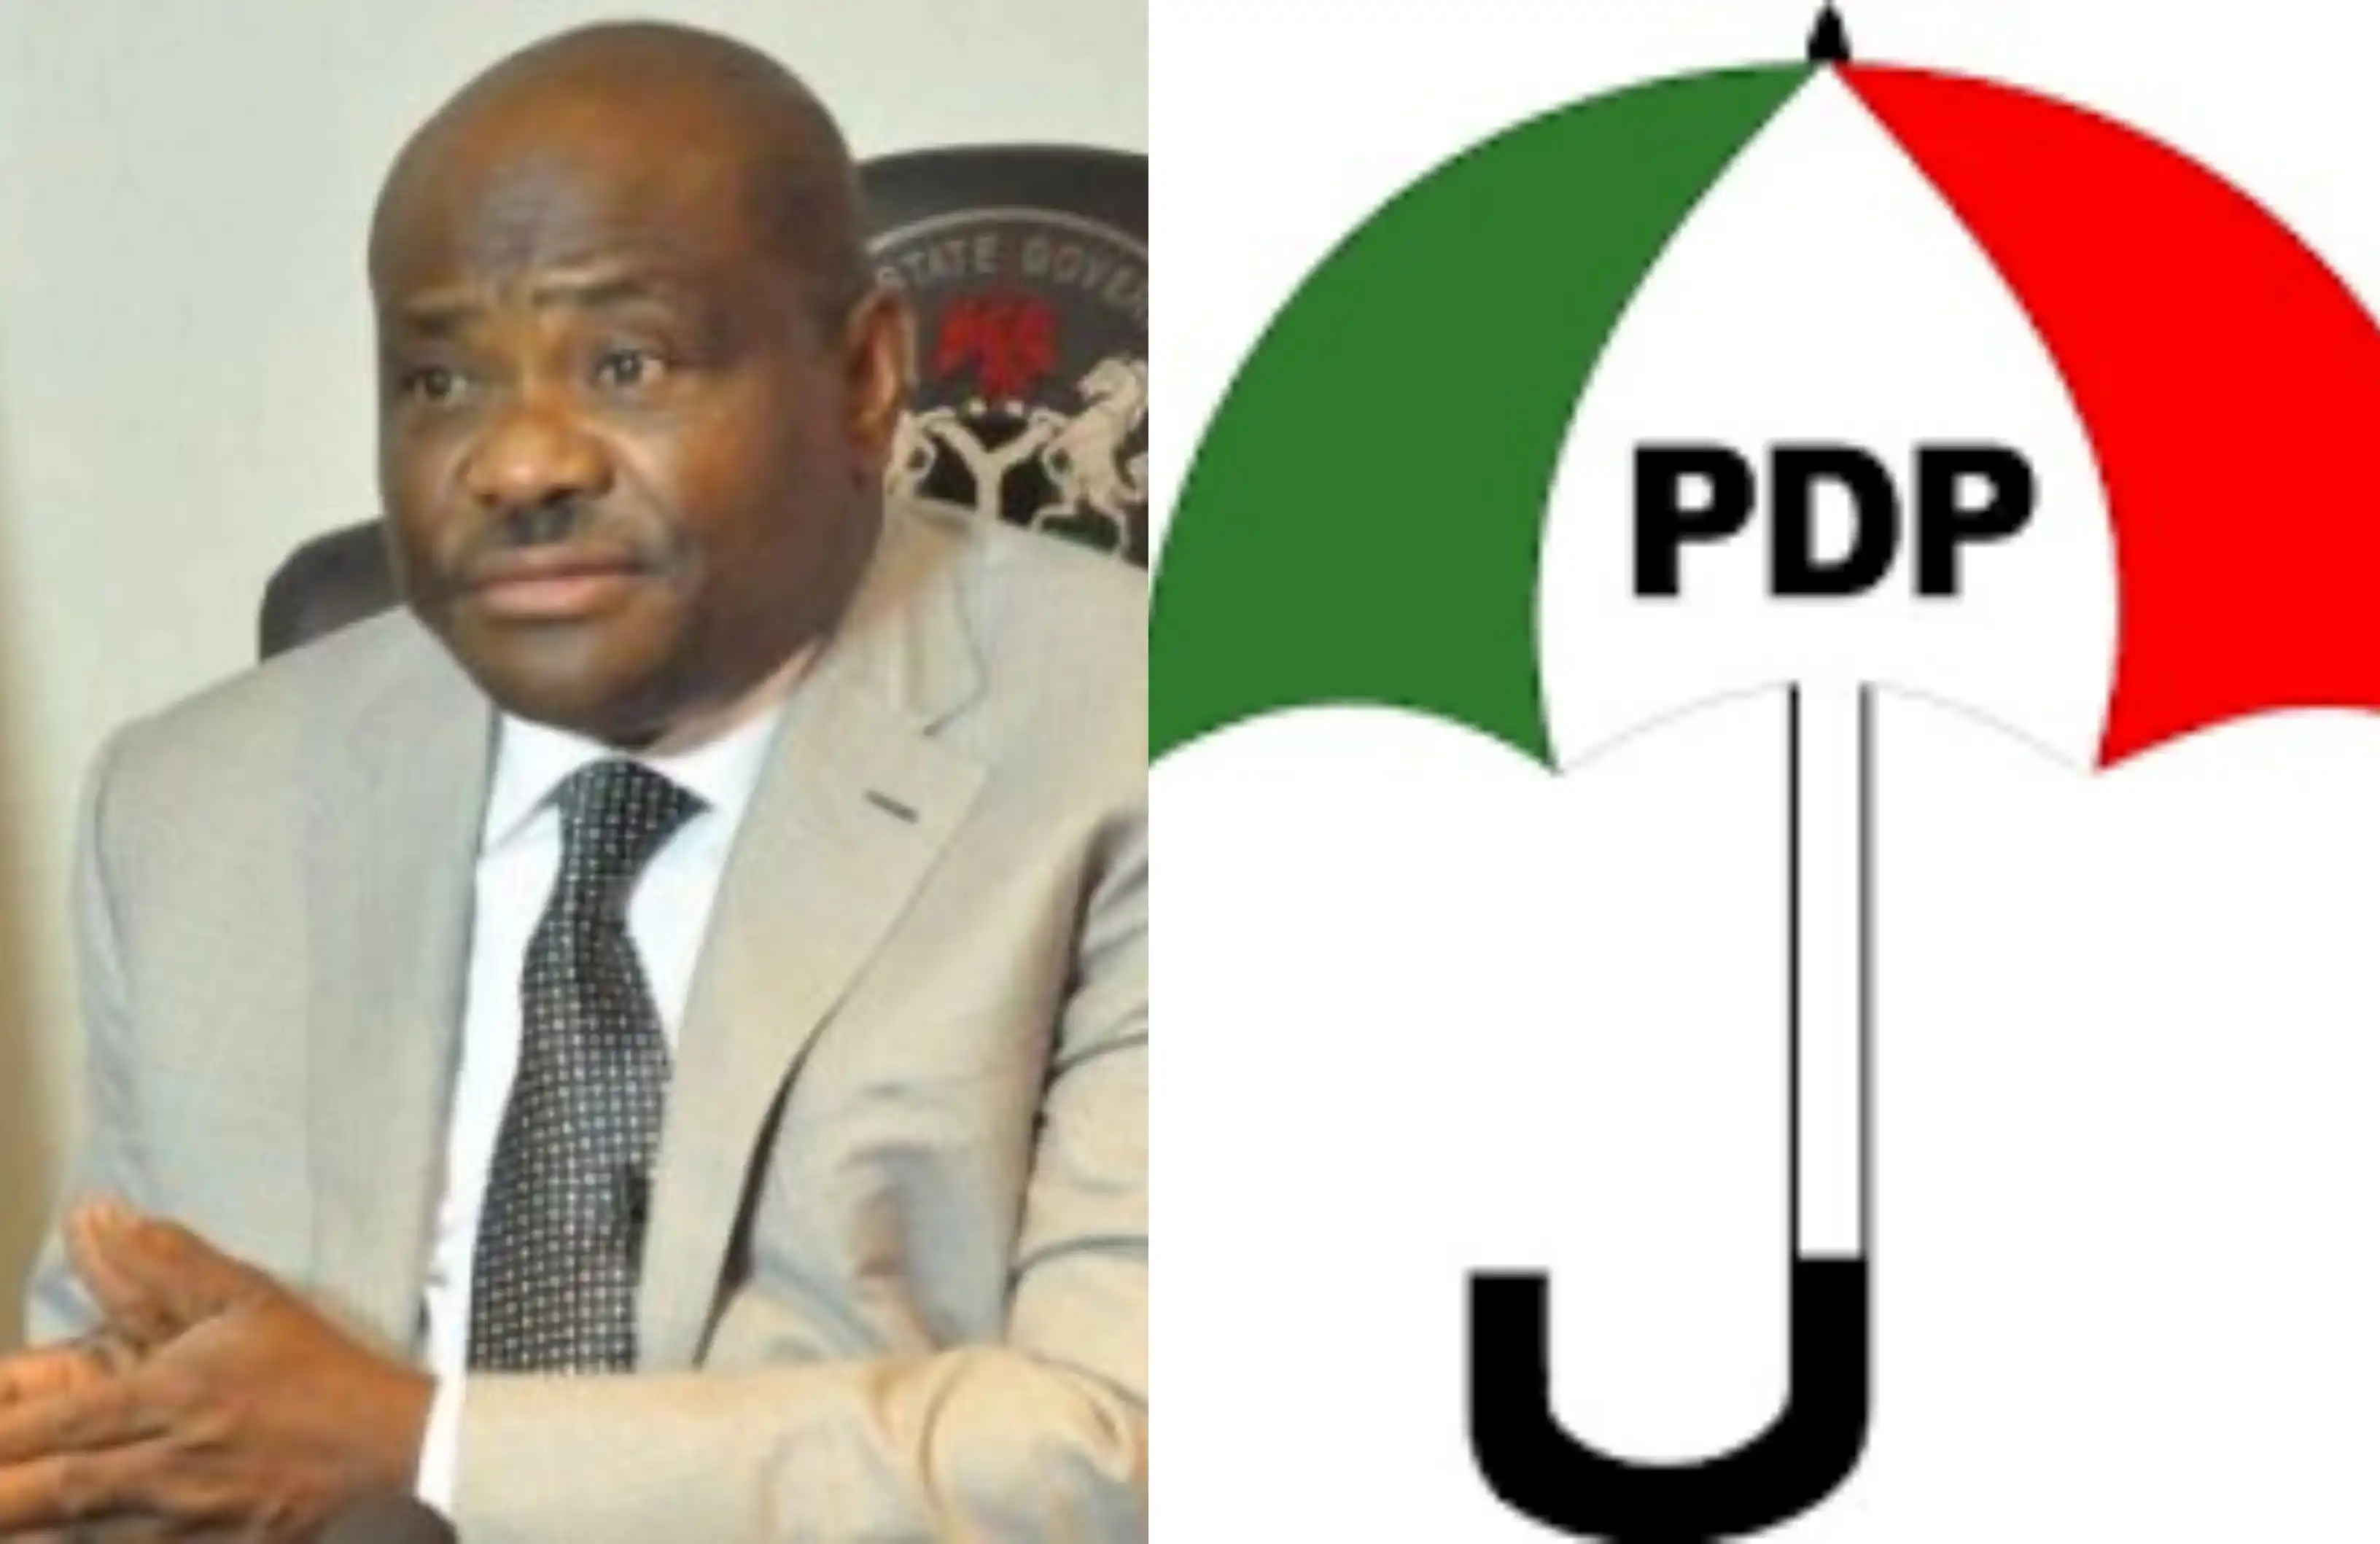 PDP reacts to Governor Wike calling its leaders 